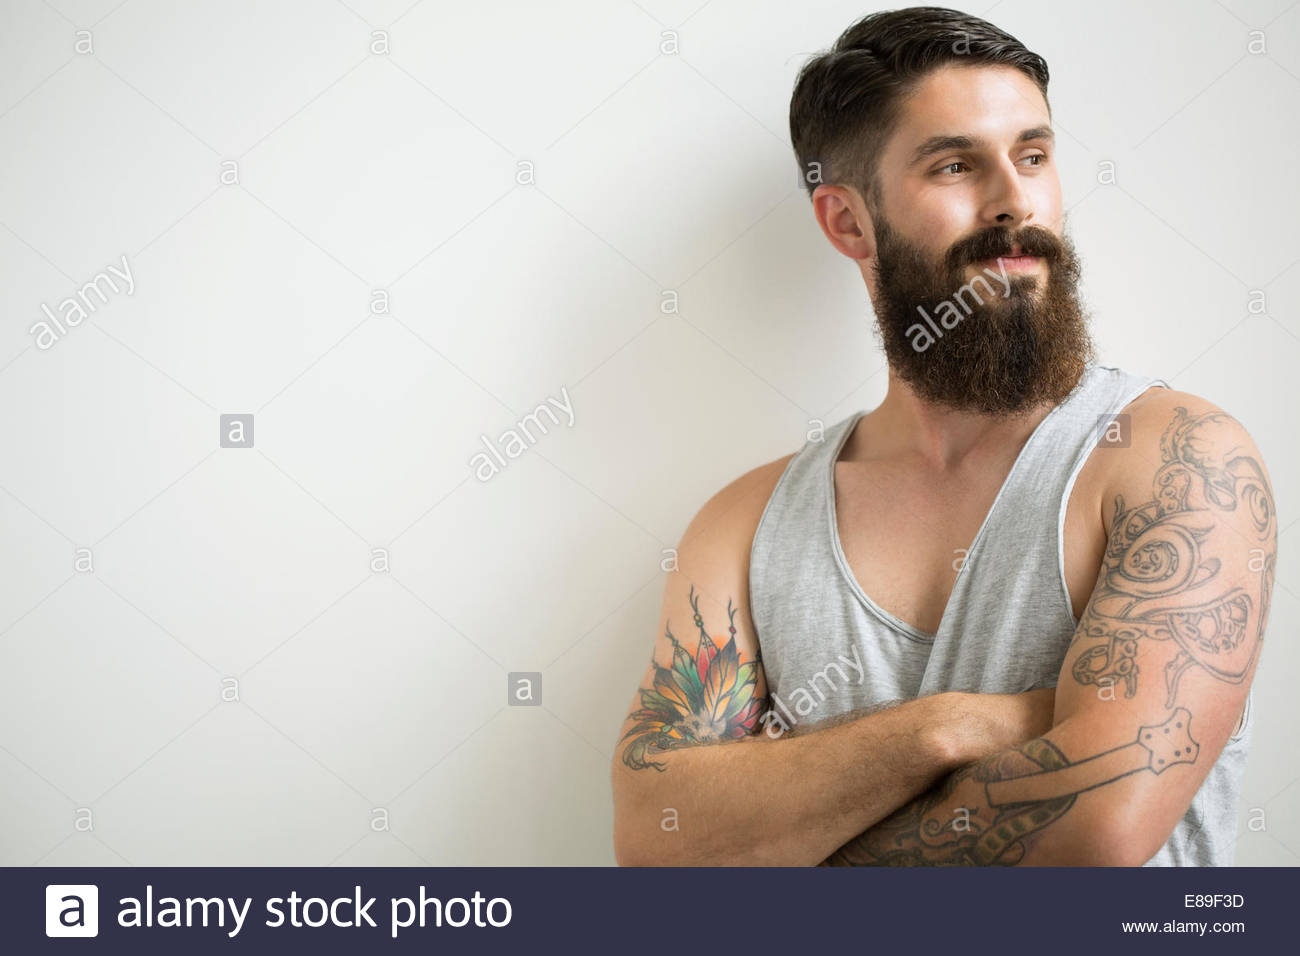 Bearded man with tattoos standing with arms crossed Stock Photo